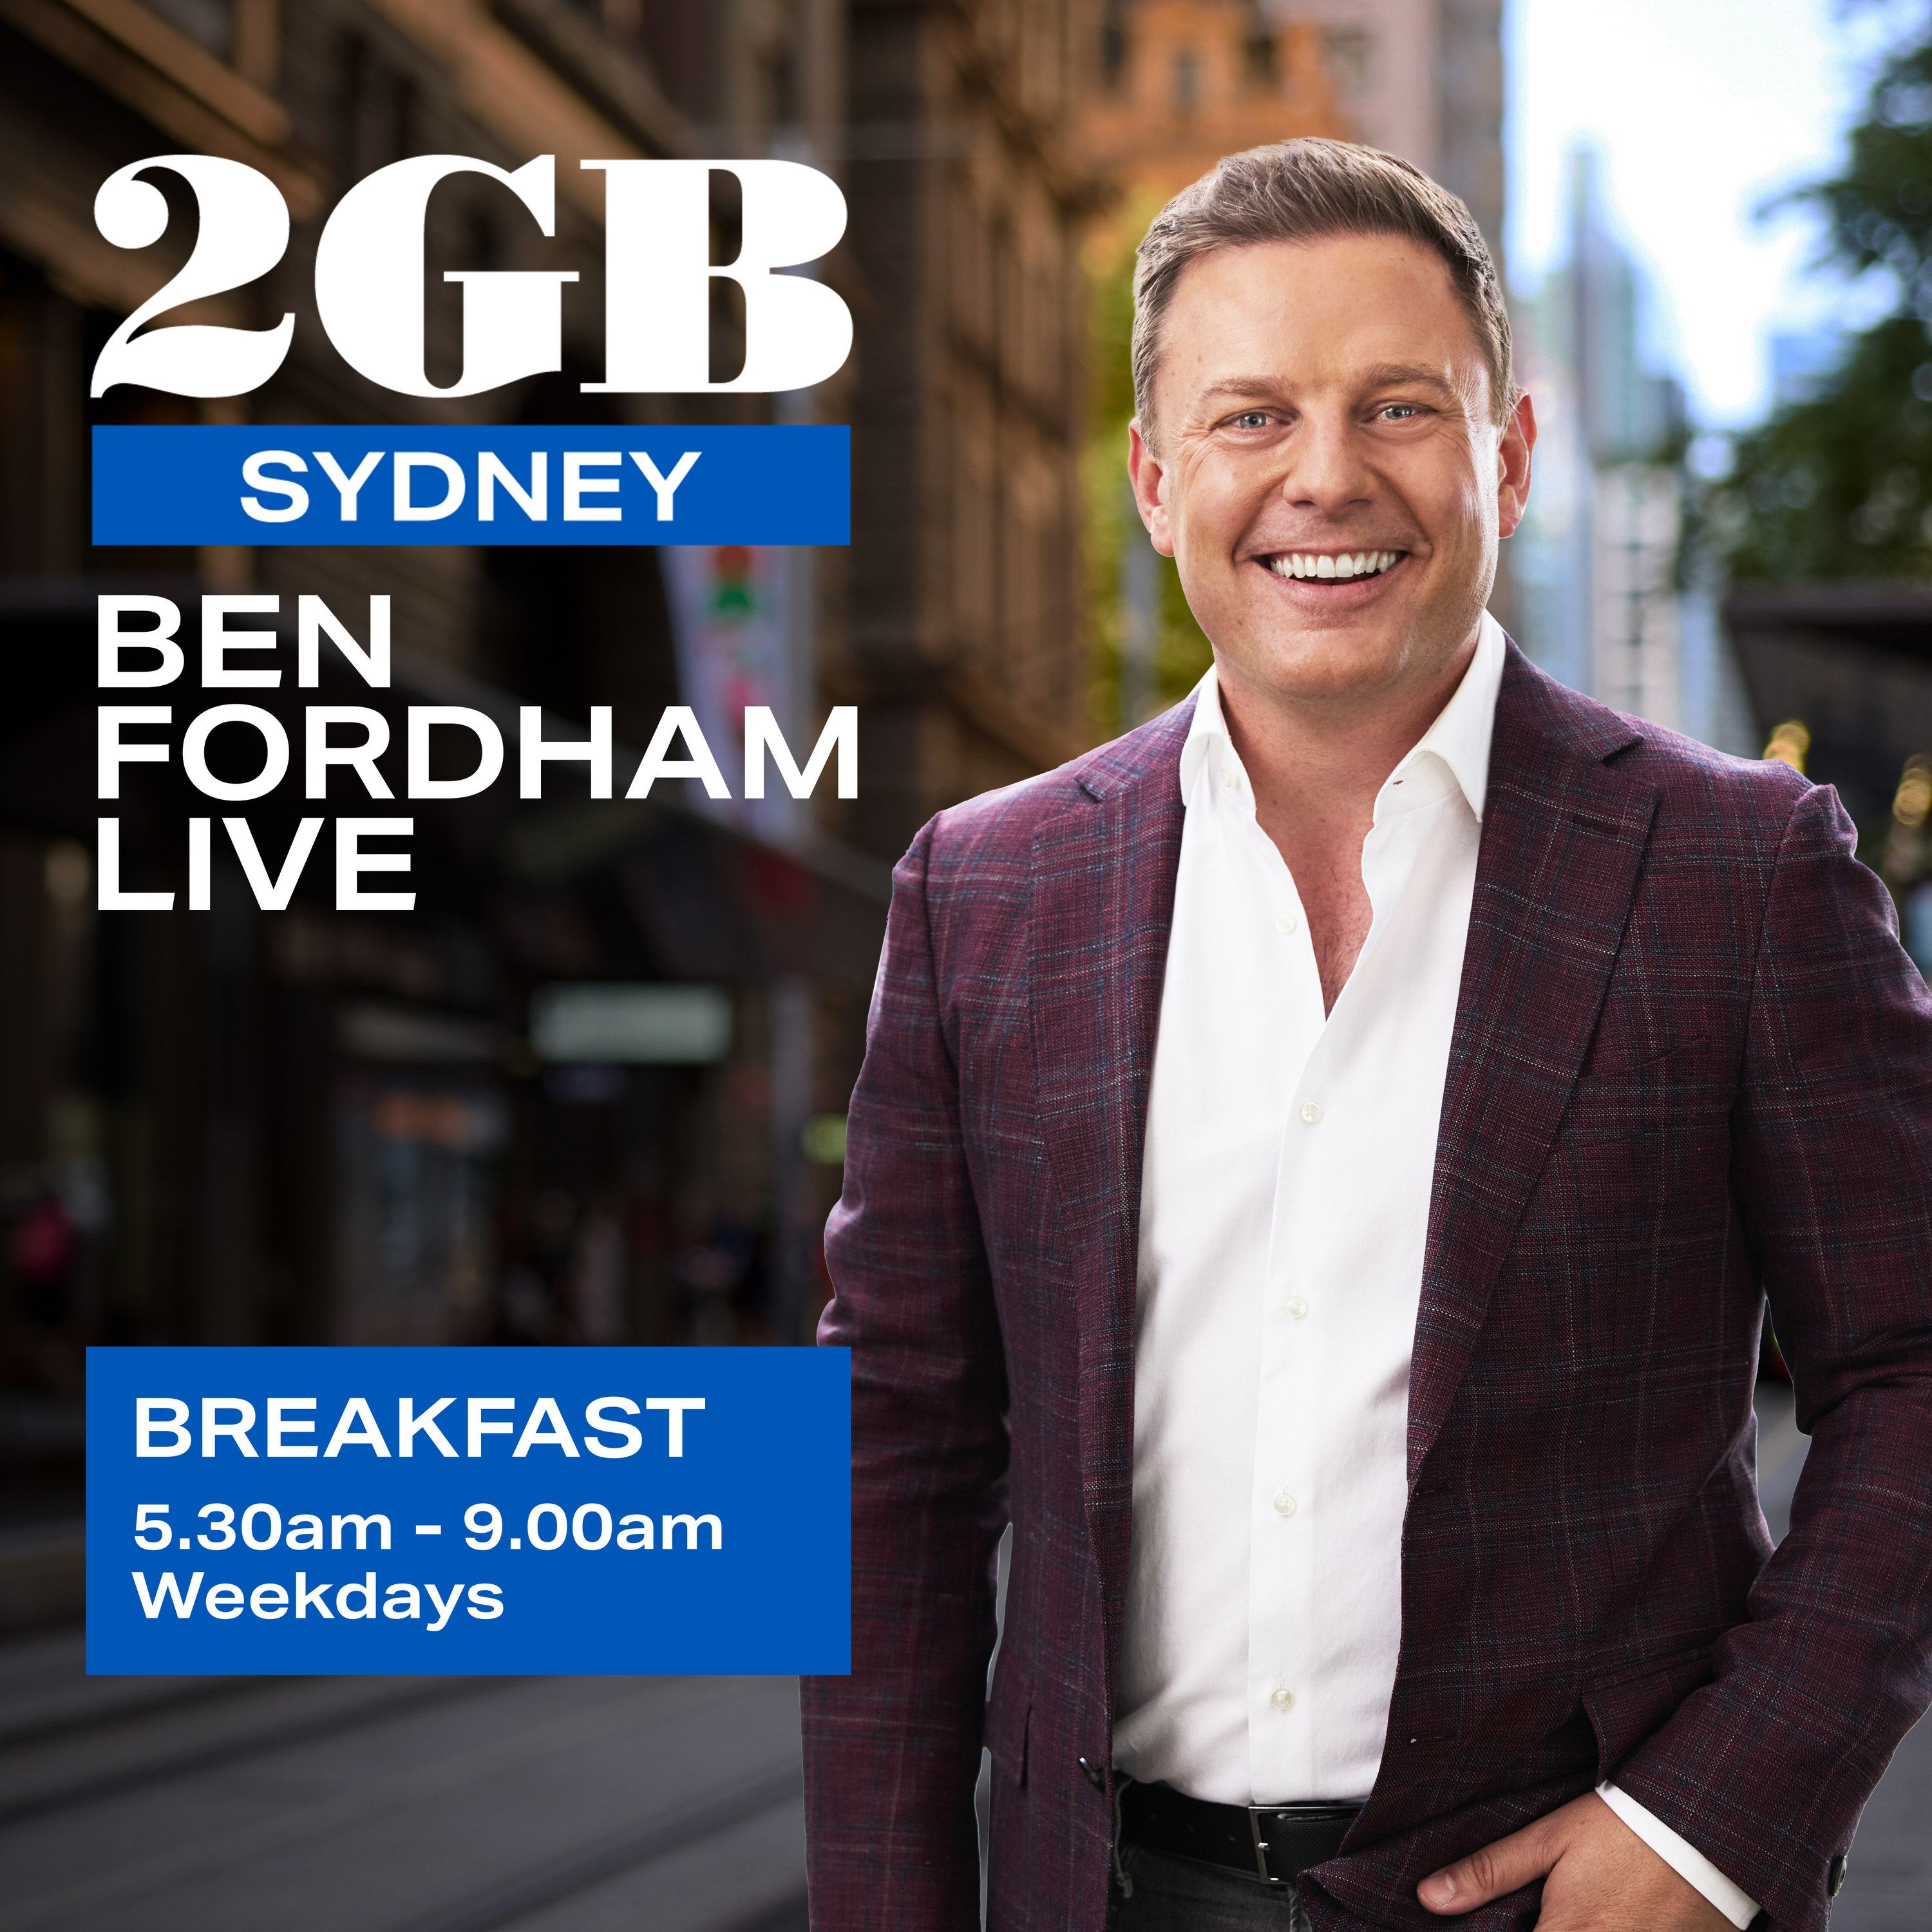 The story that brought Ben Fordham to tears